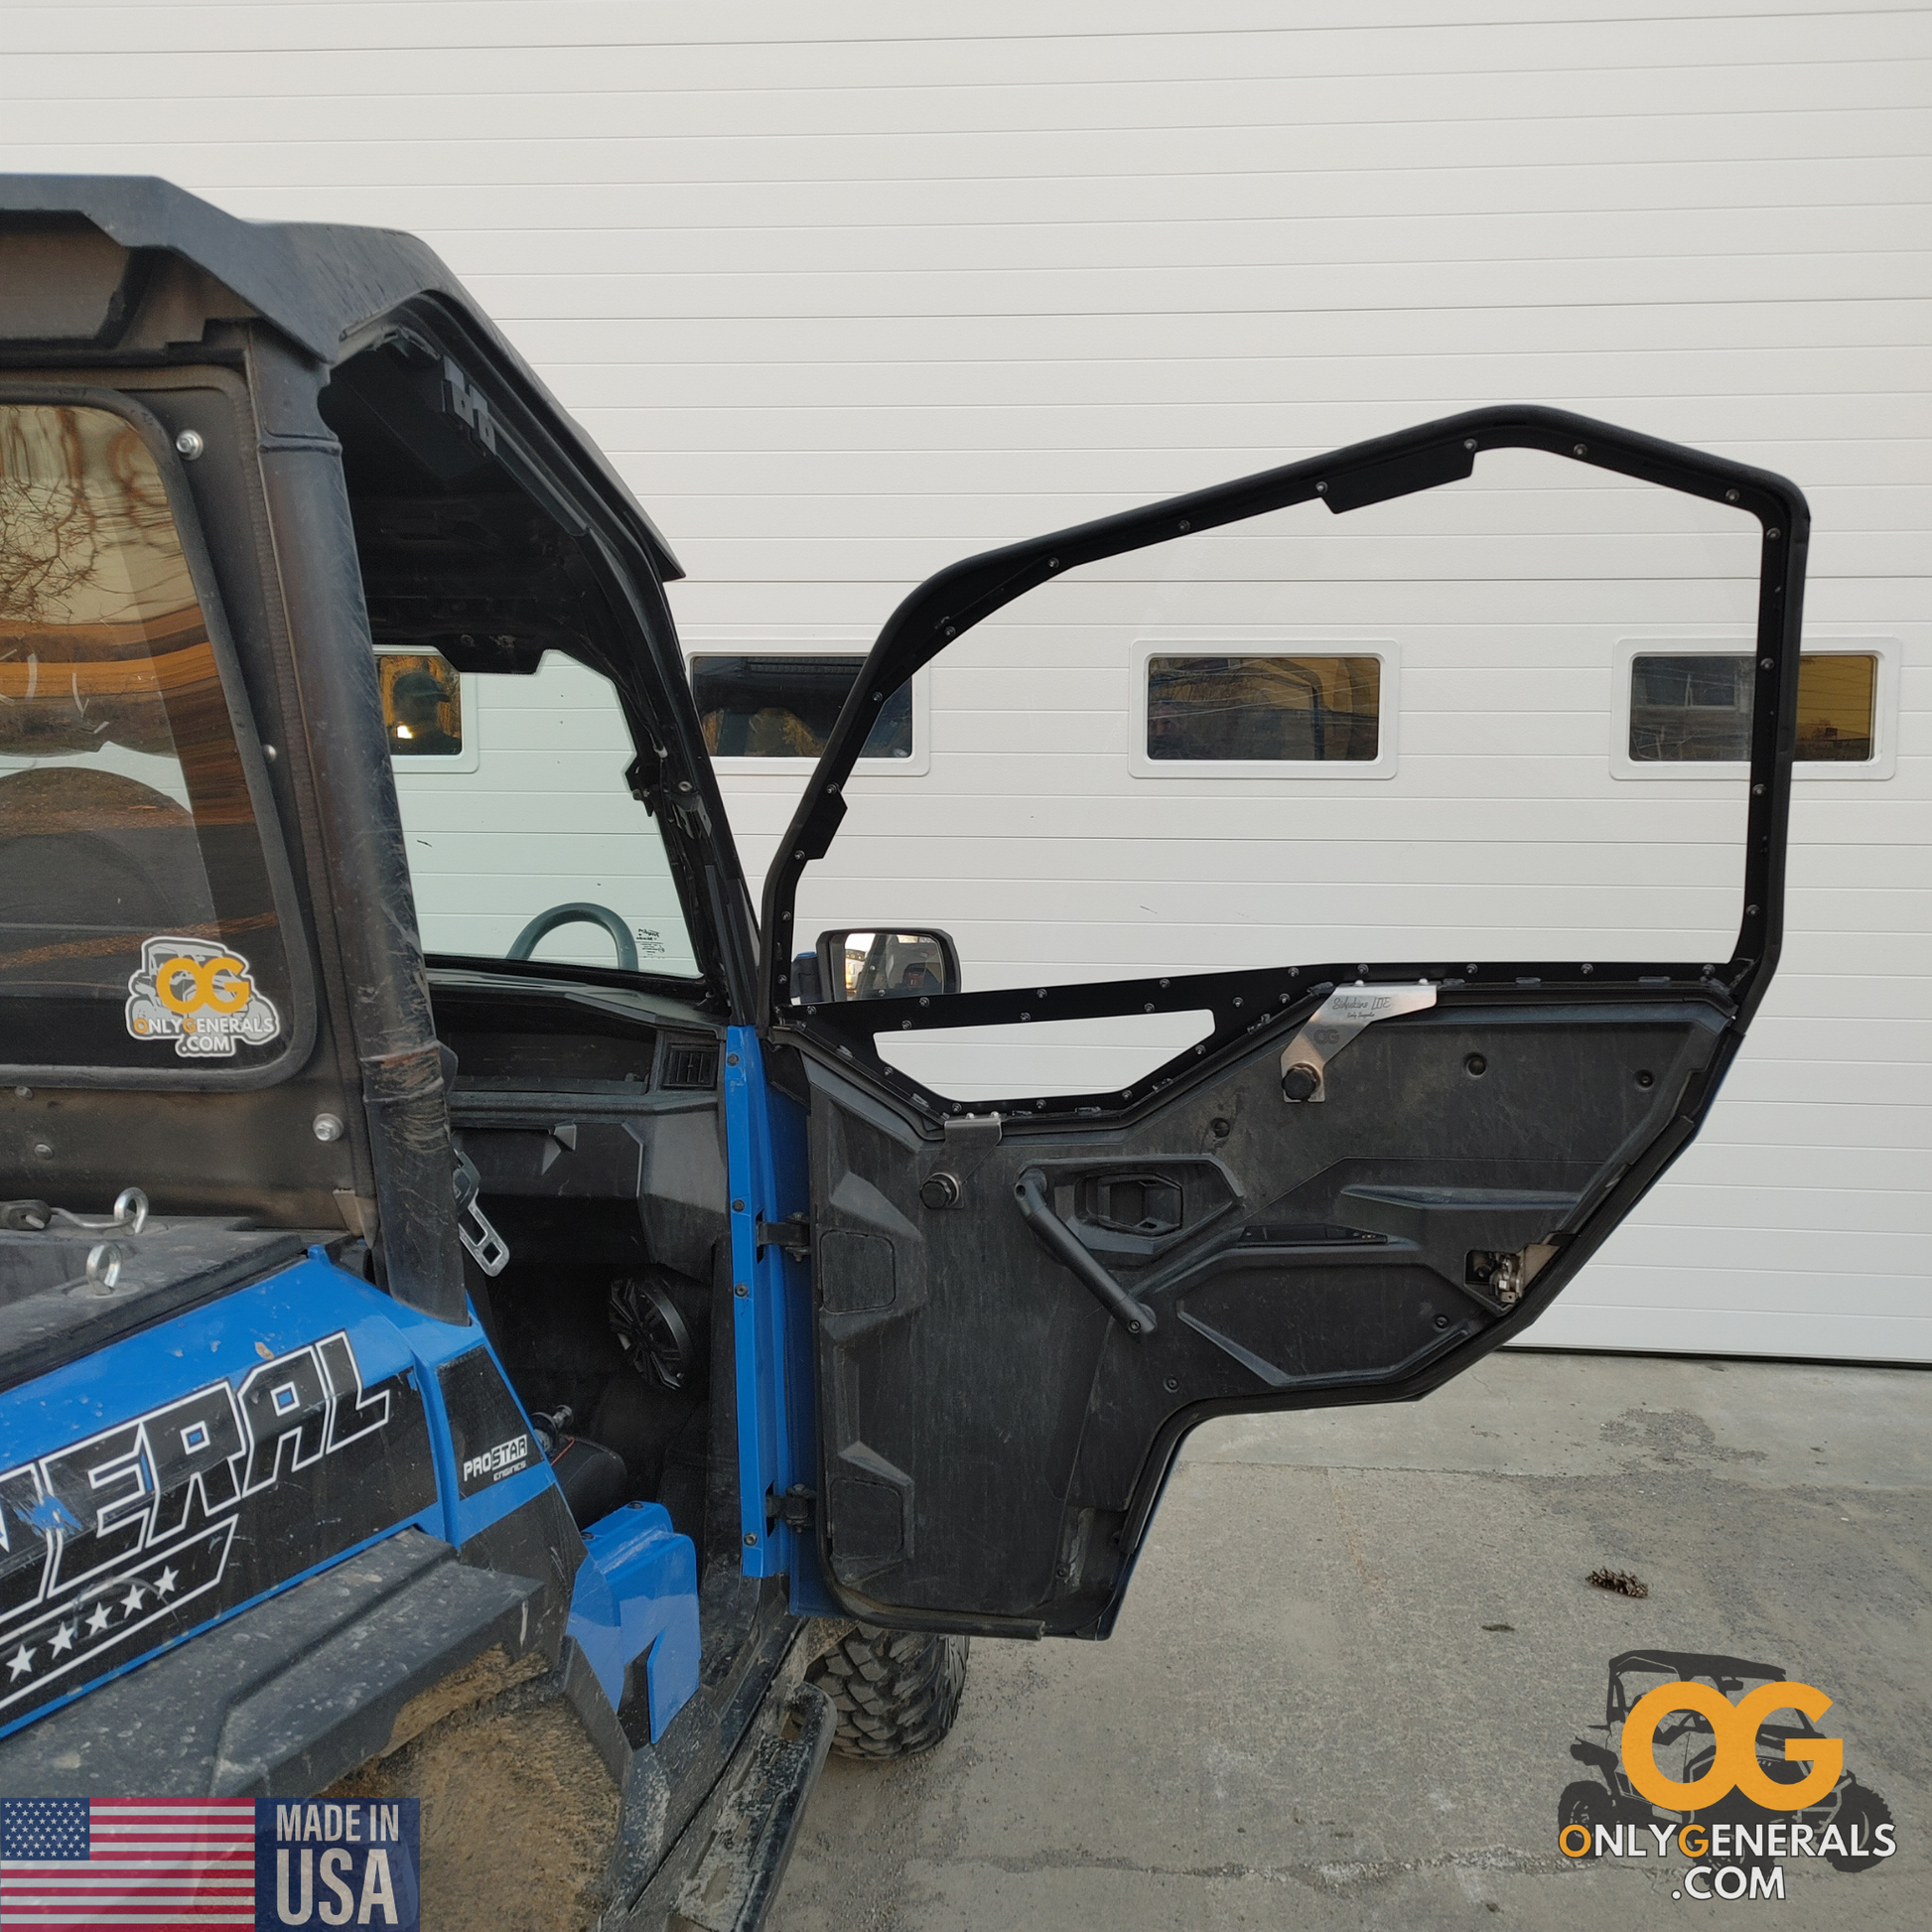 Customer submitted photo with a Polaris General door open showing off their SideskinsLITE hard upper doors from OnlyGenerals